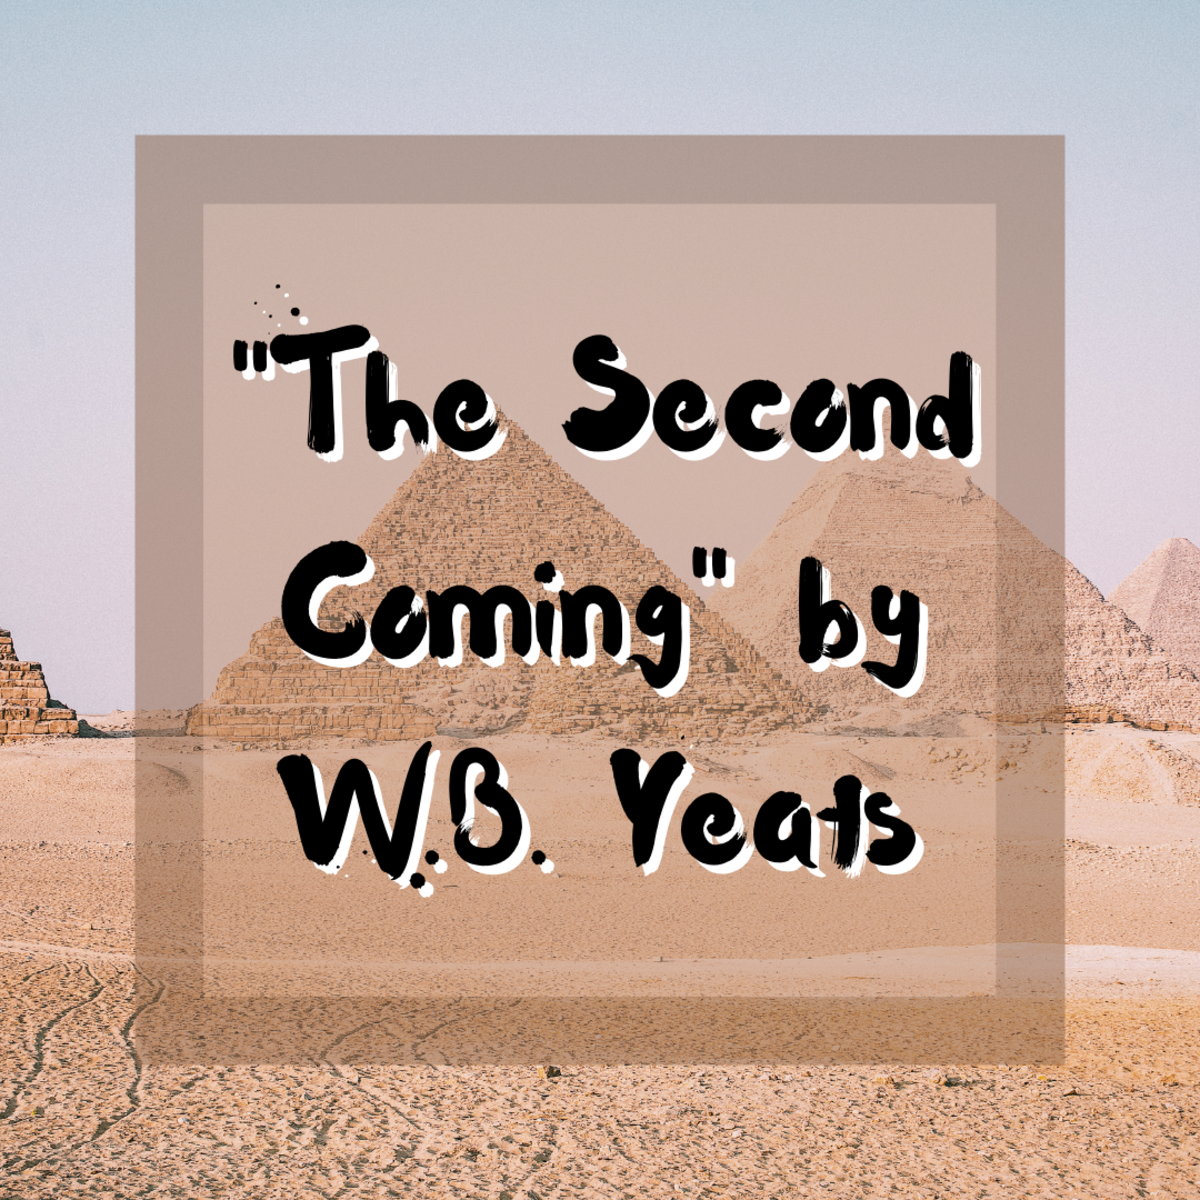 This article provides a summary and analysis of William Butler Yeats's famous poem "The Second Coming."